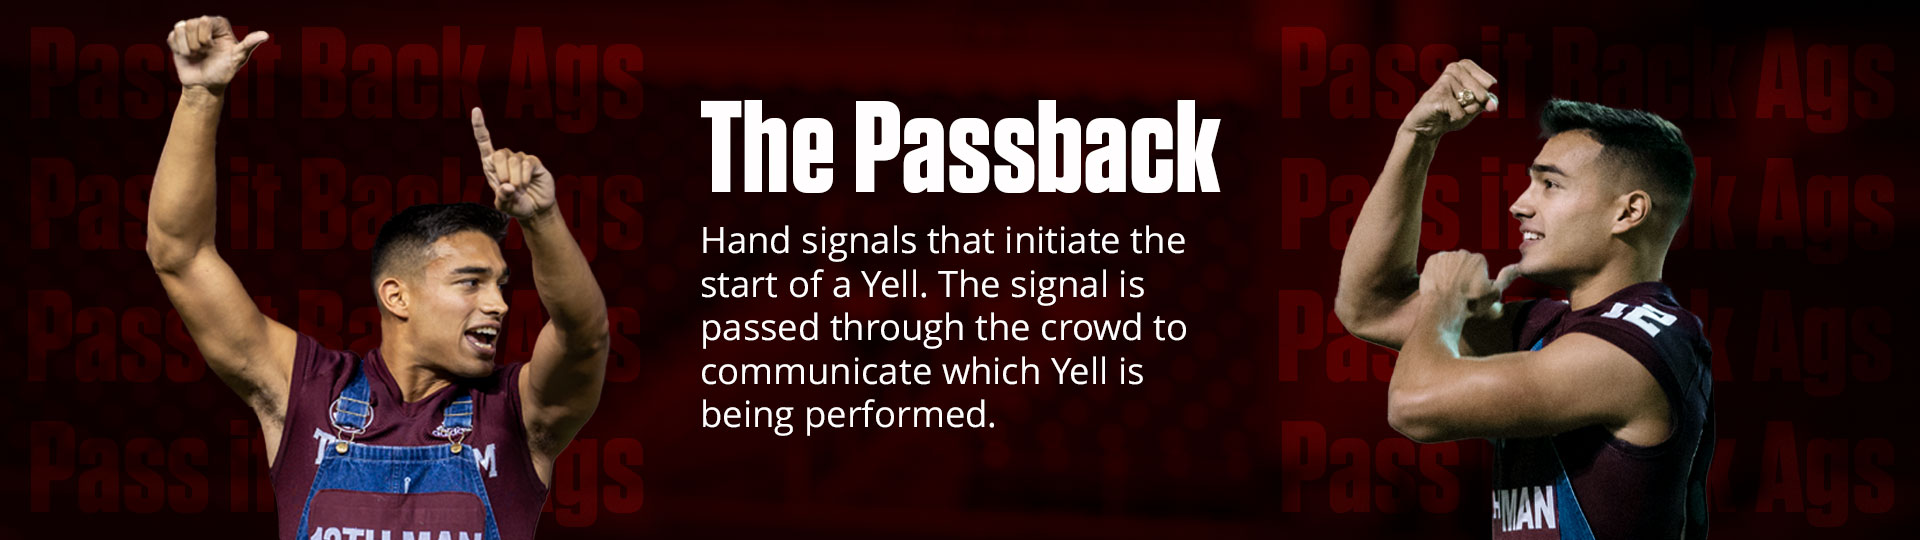 Graphic that reads "The Passback. Hand signals that signal the start of a Yell. The signal is passed through the crowd to communicate which Yell is to be performed